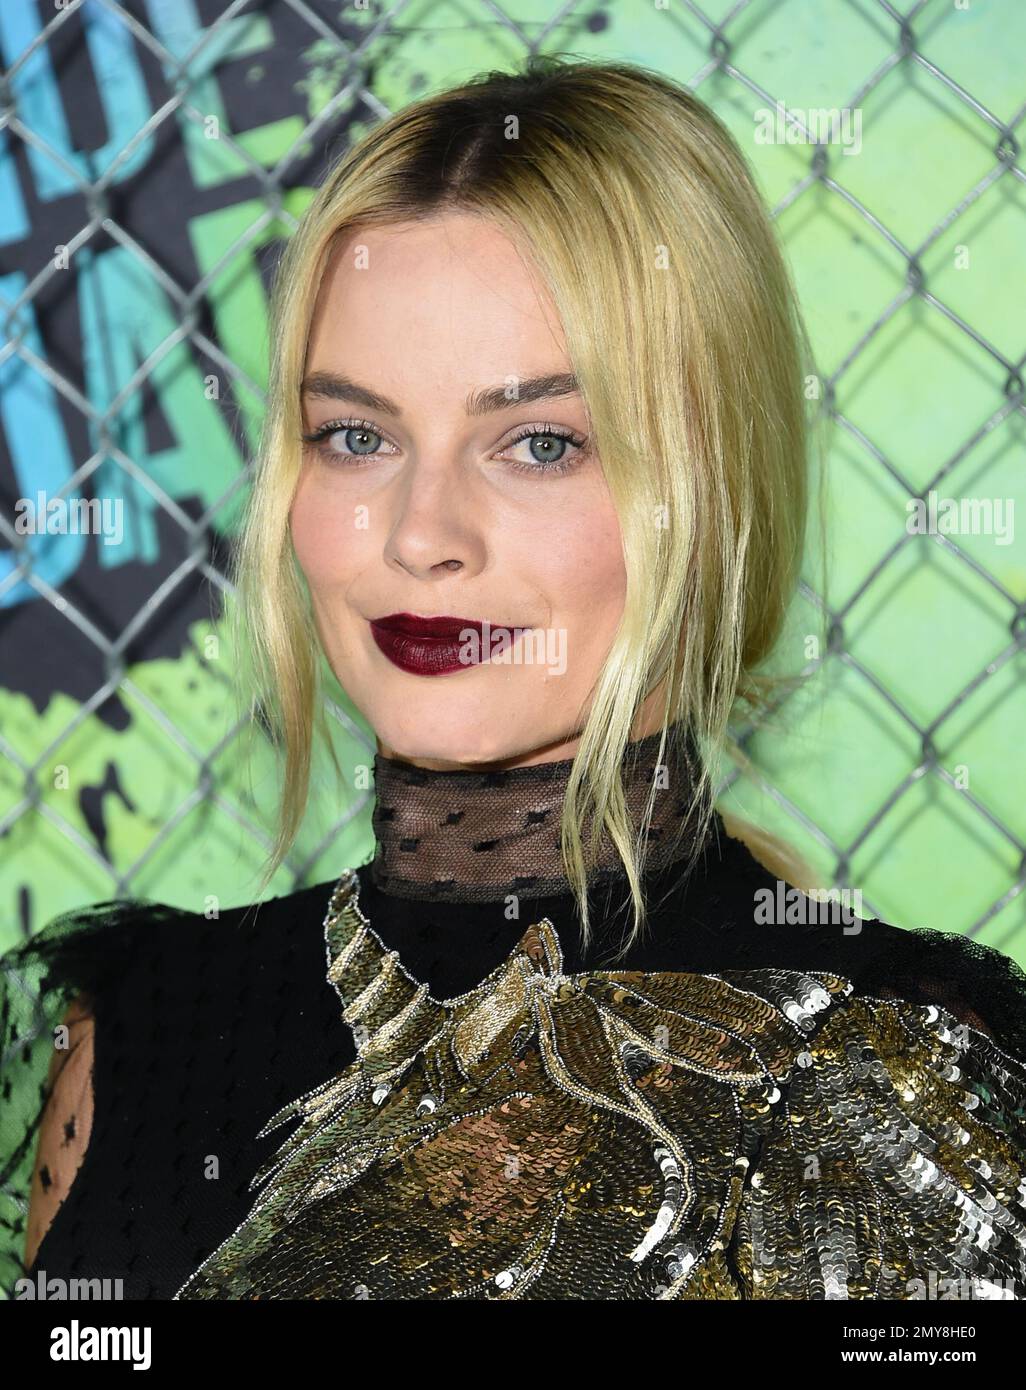 Actress Margot Robbie Attends The World Premiere Of Suicide Squad At The Beacon Theatre On